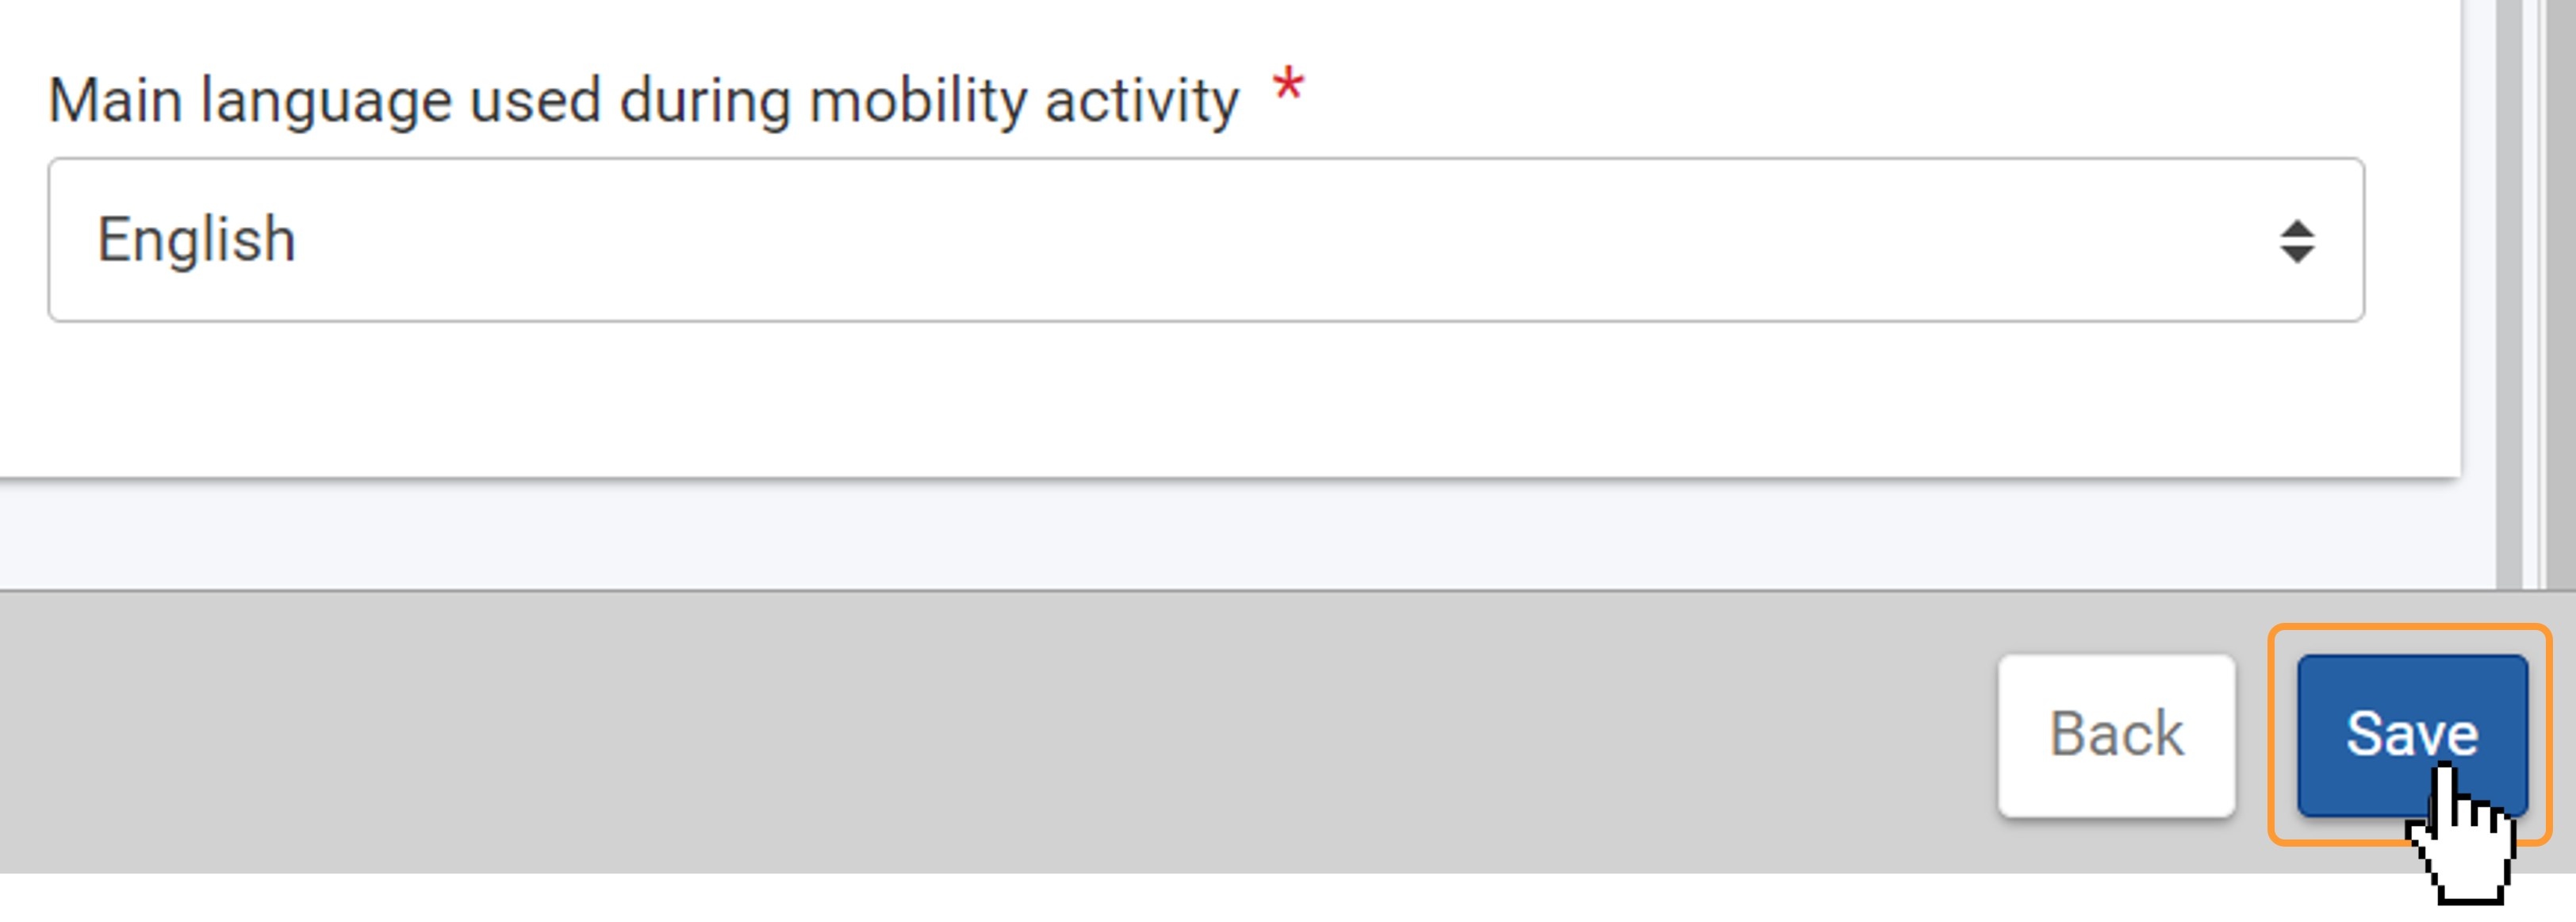 Click on Save to save the draft mobility activity